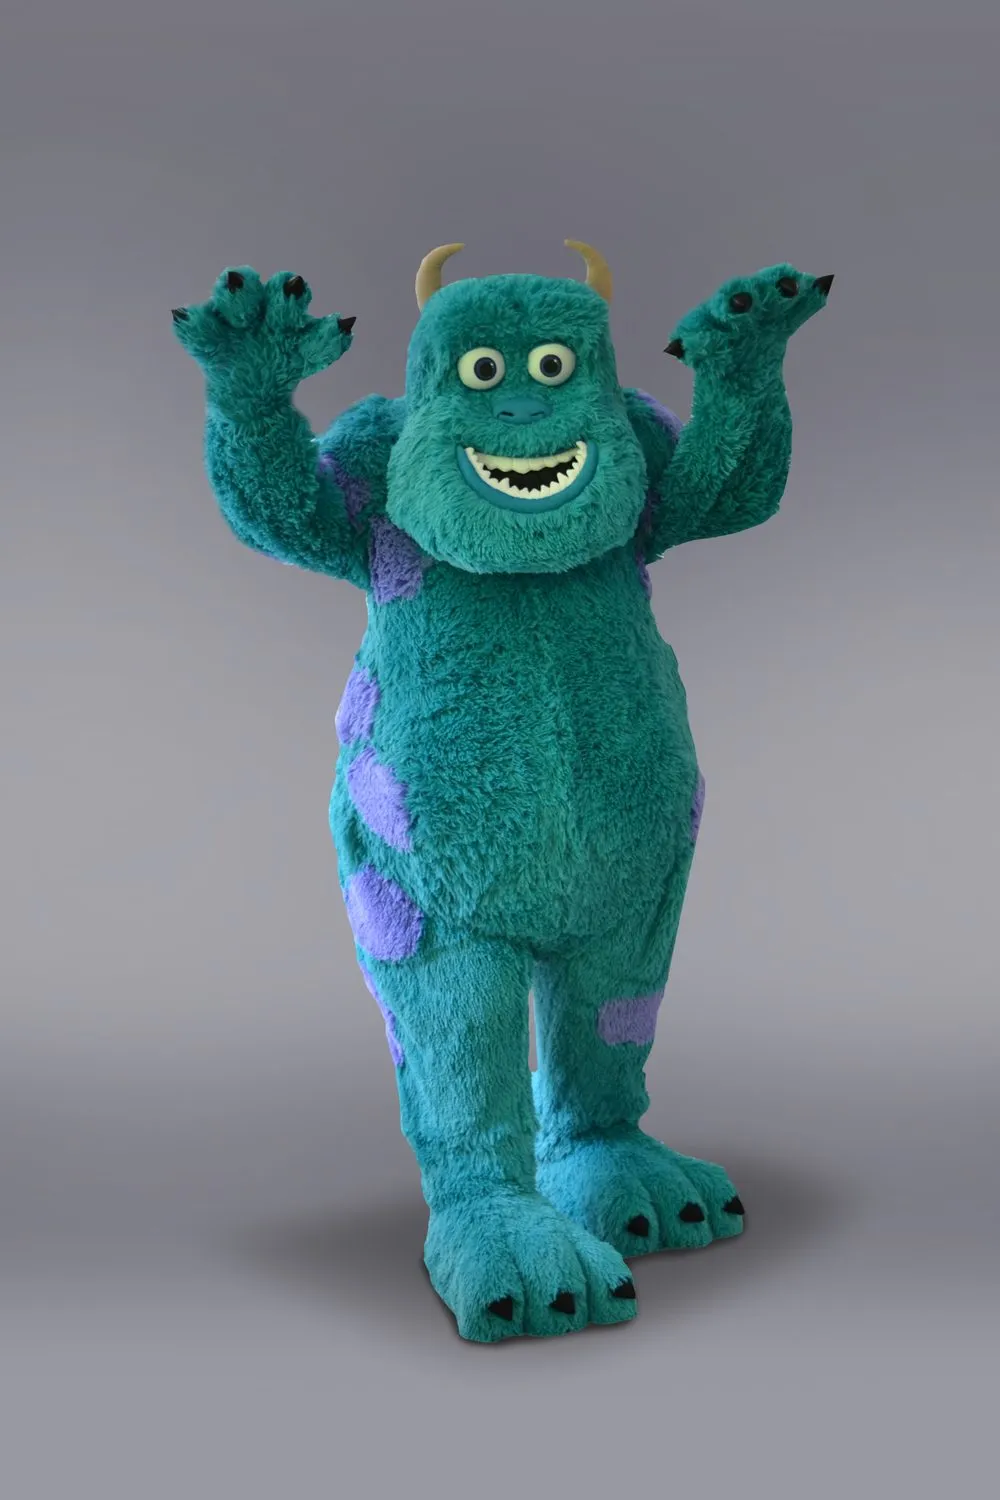 Scary blue monster mascot costume adult size halloween street funny